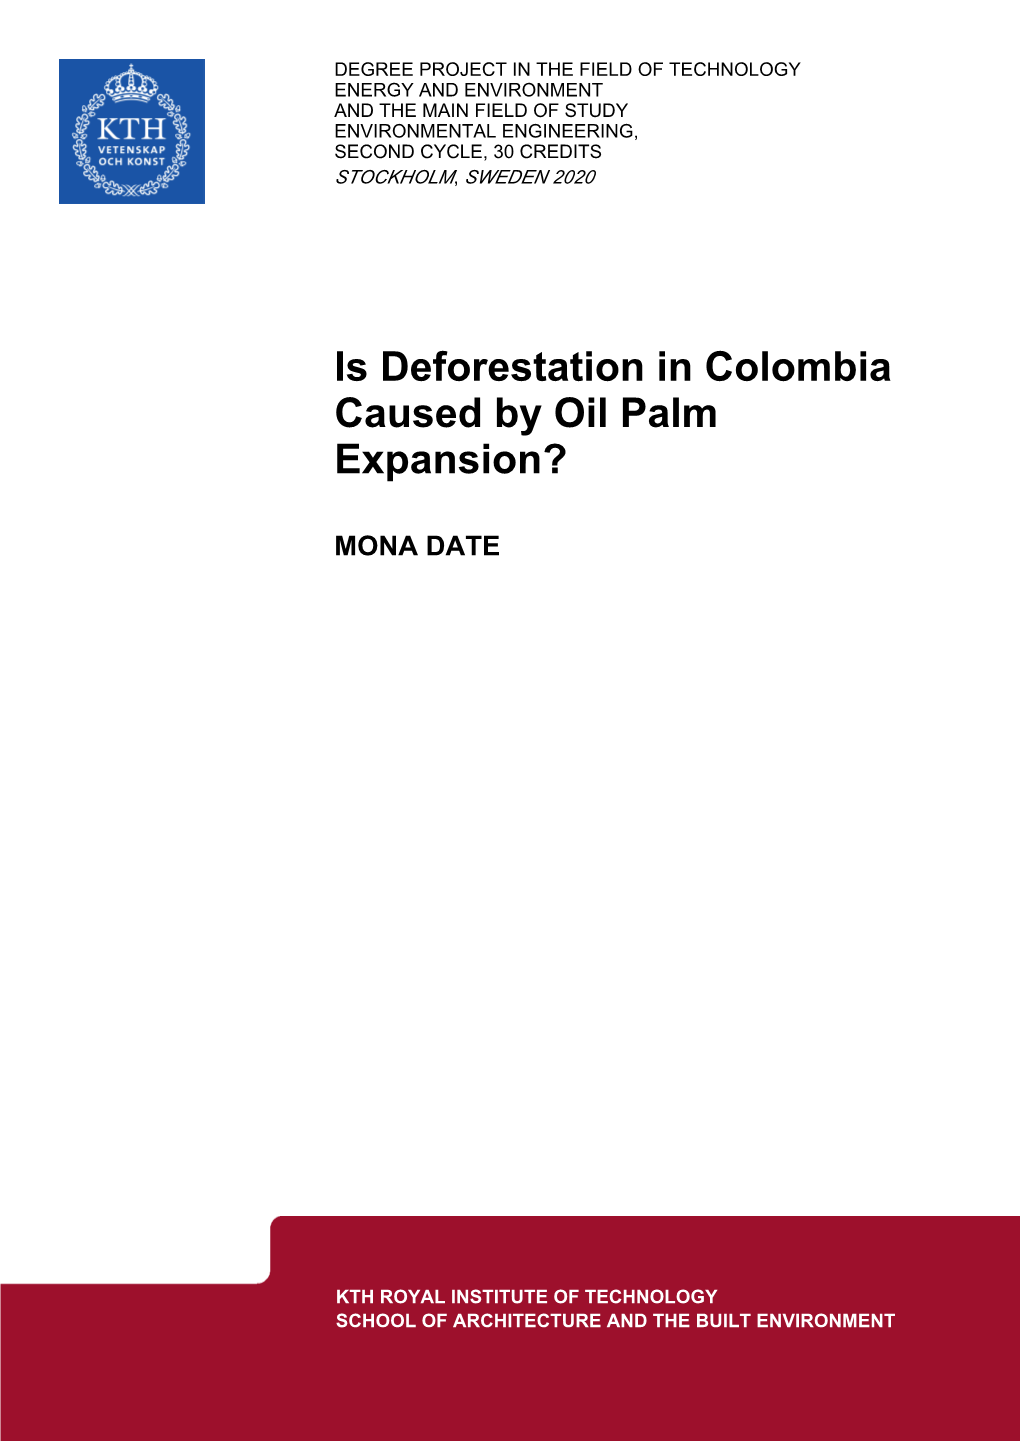 Is Deforestation in Colombia Caused by Oil Palm Expansion?